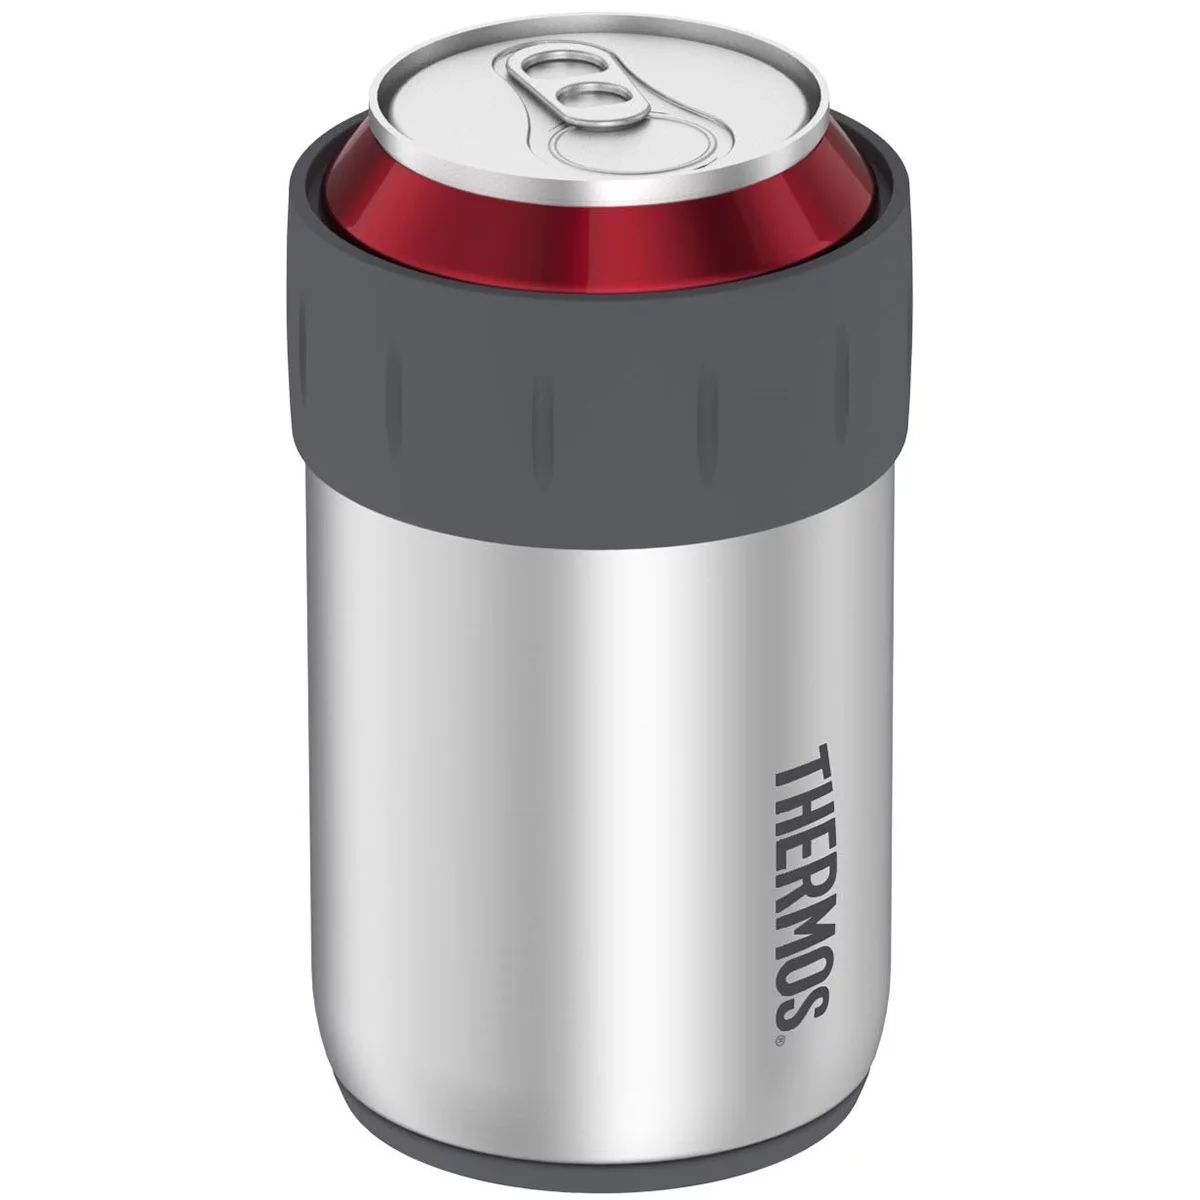 Thermos 12 oz. Insulated Stainless Steel Beverage Can Insulator - Silver/Gray | Walmart (US)